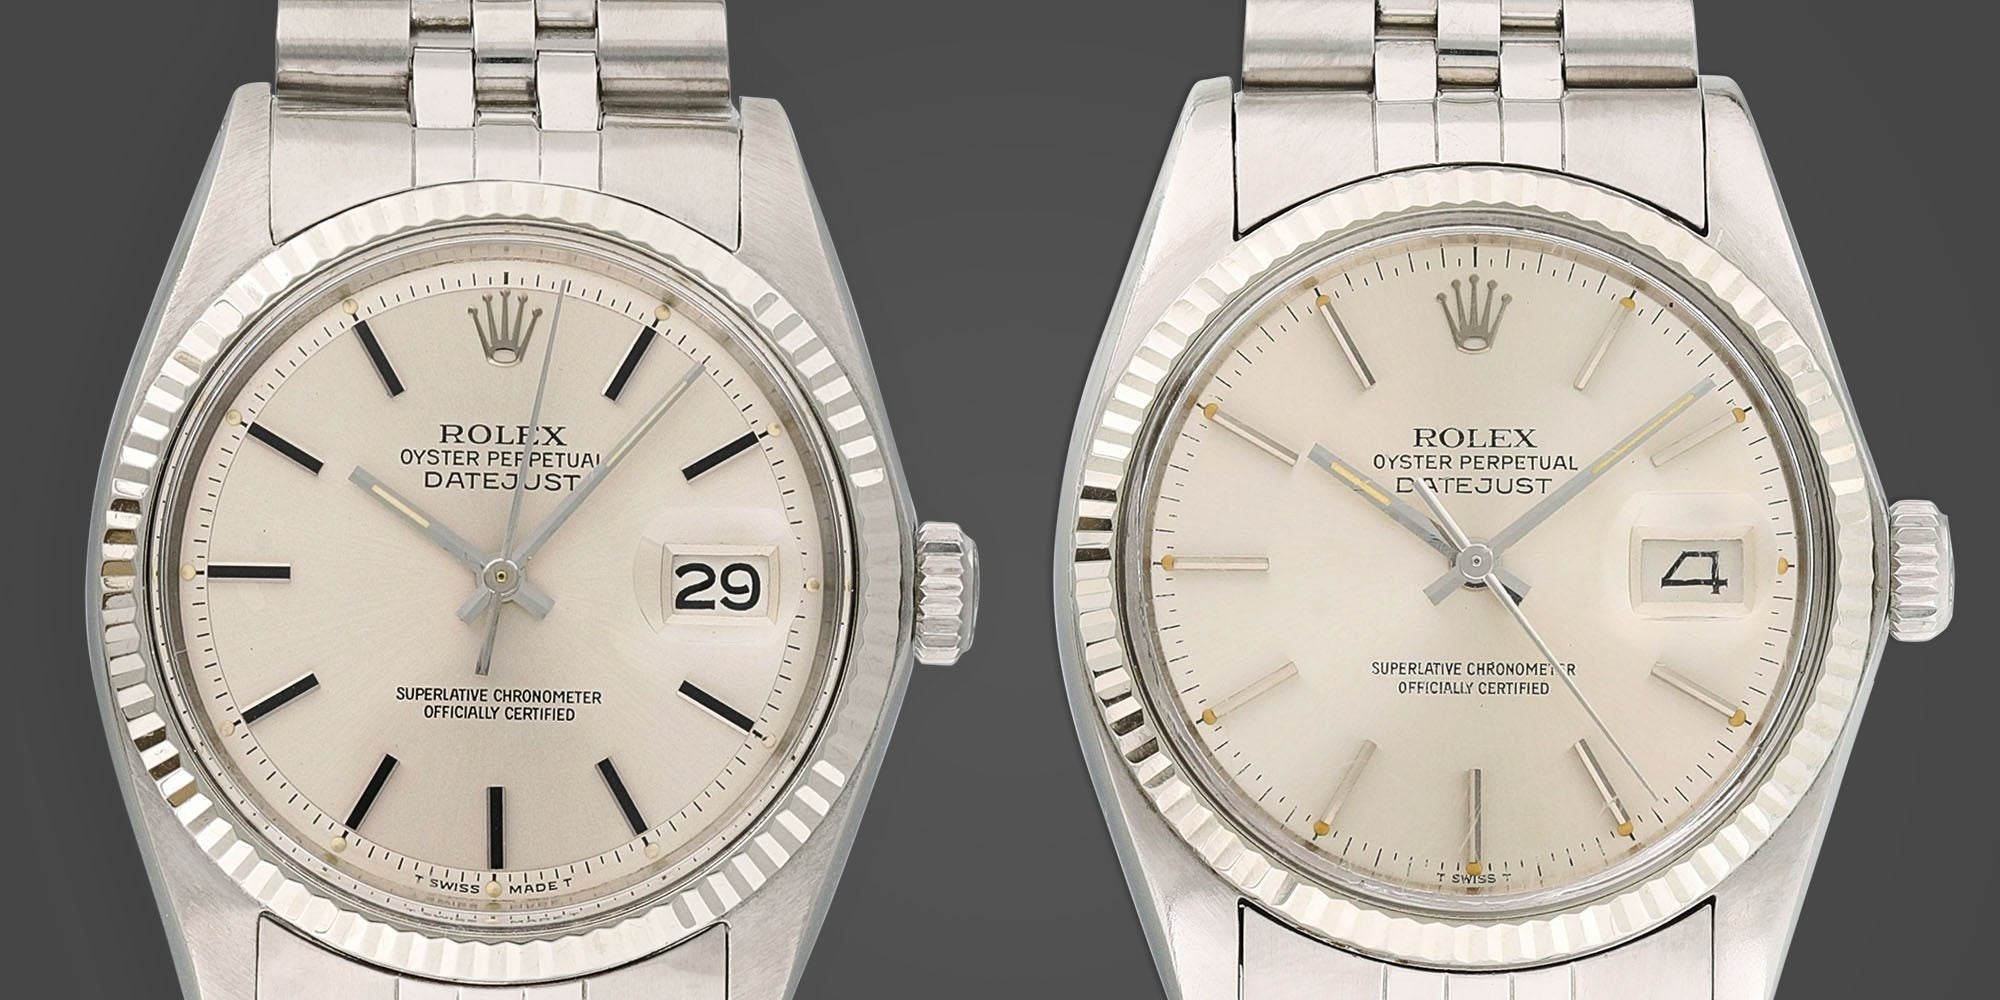 stout Ring tilbage at straffe The Rolex Datejust Ref. 1601 vs. Ref. 16014 Watch